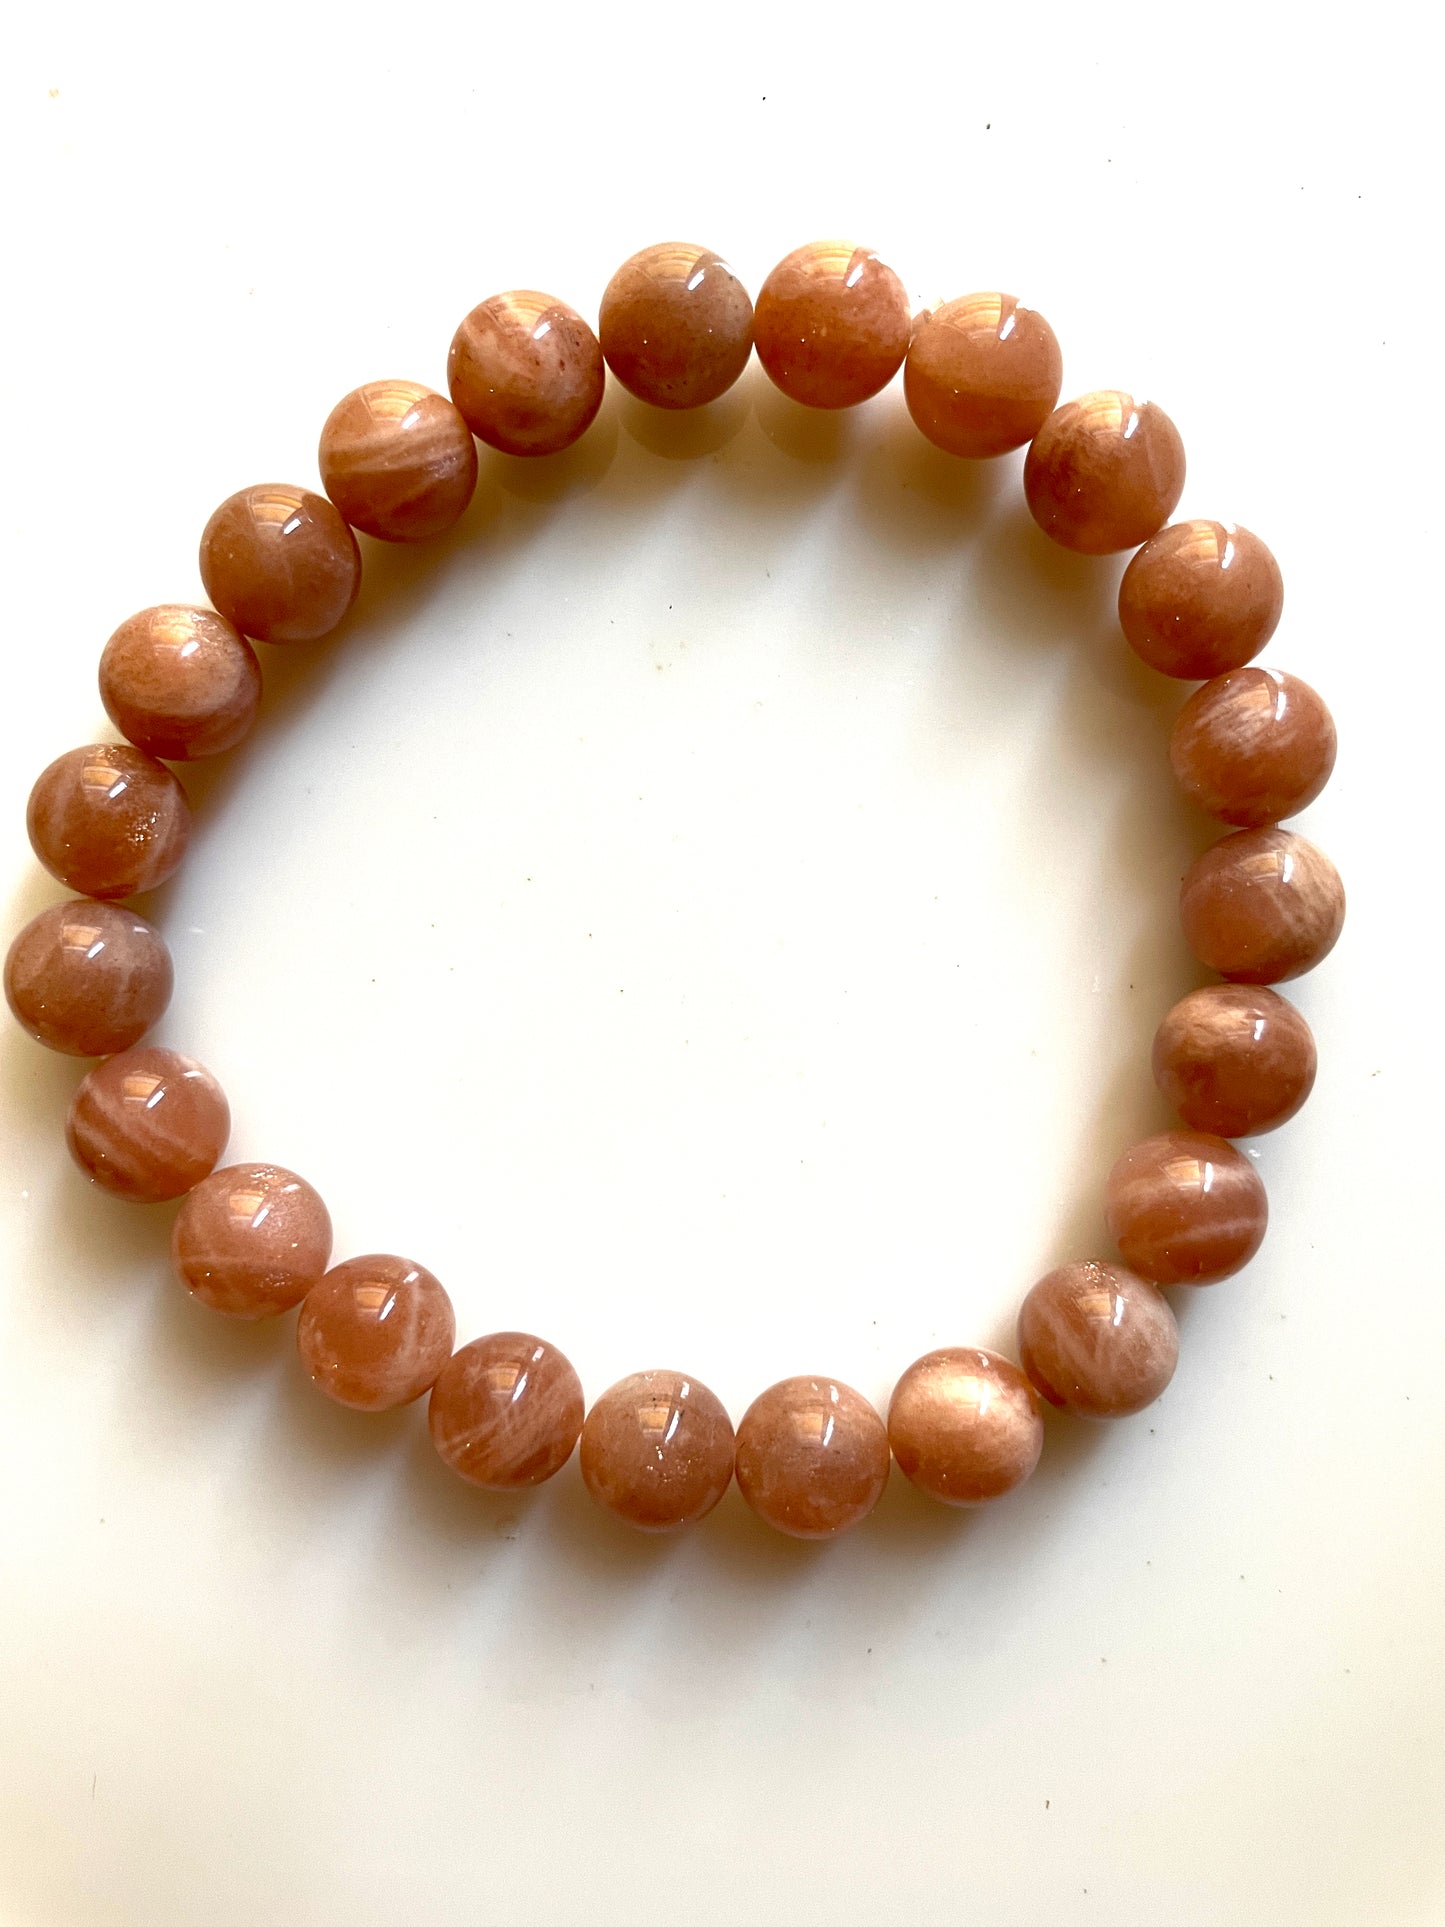 Balnce emotions with Peach Moonstone